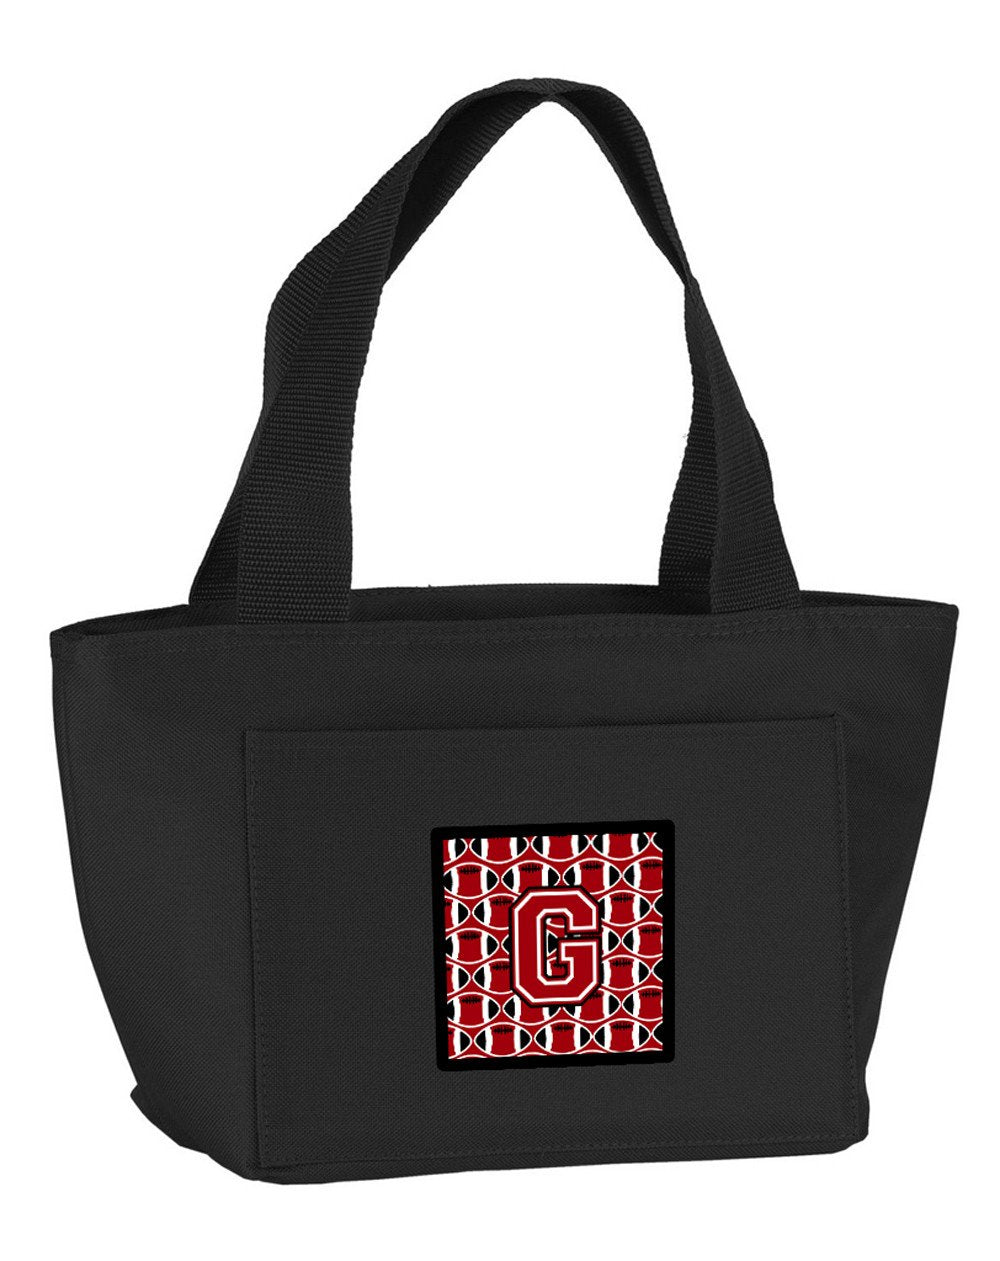 Letter G Football Red, Black and White Lunch Bag CJ1073-GBK-8808 by Caroline's Treasures